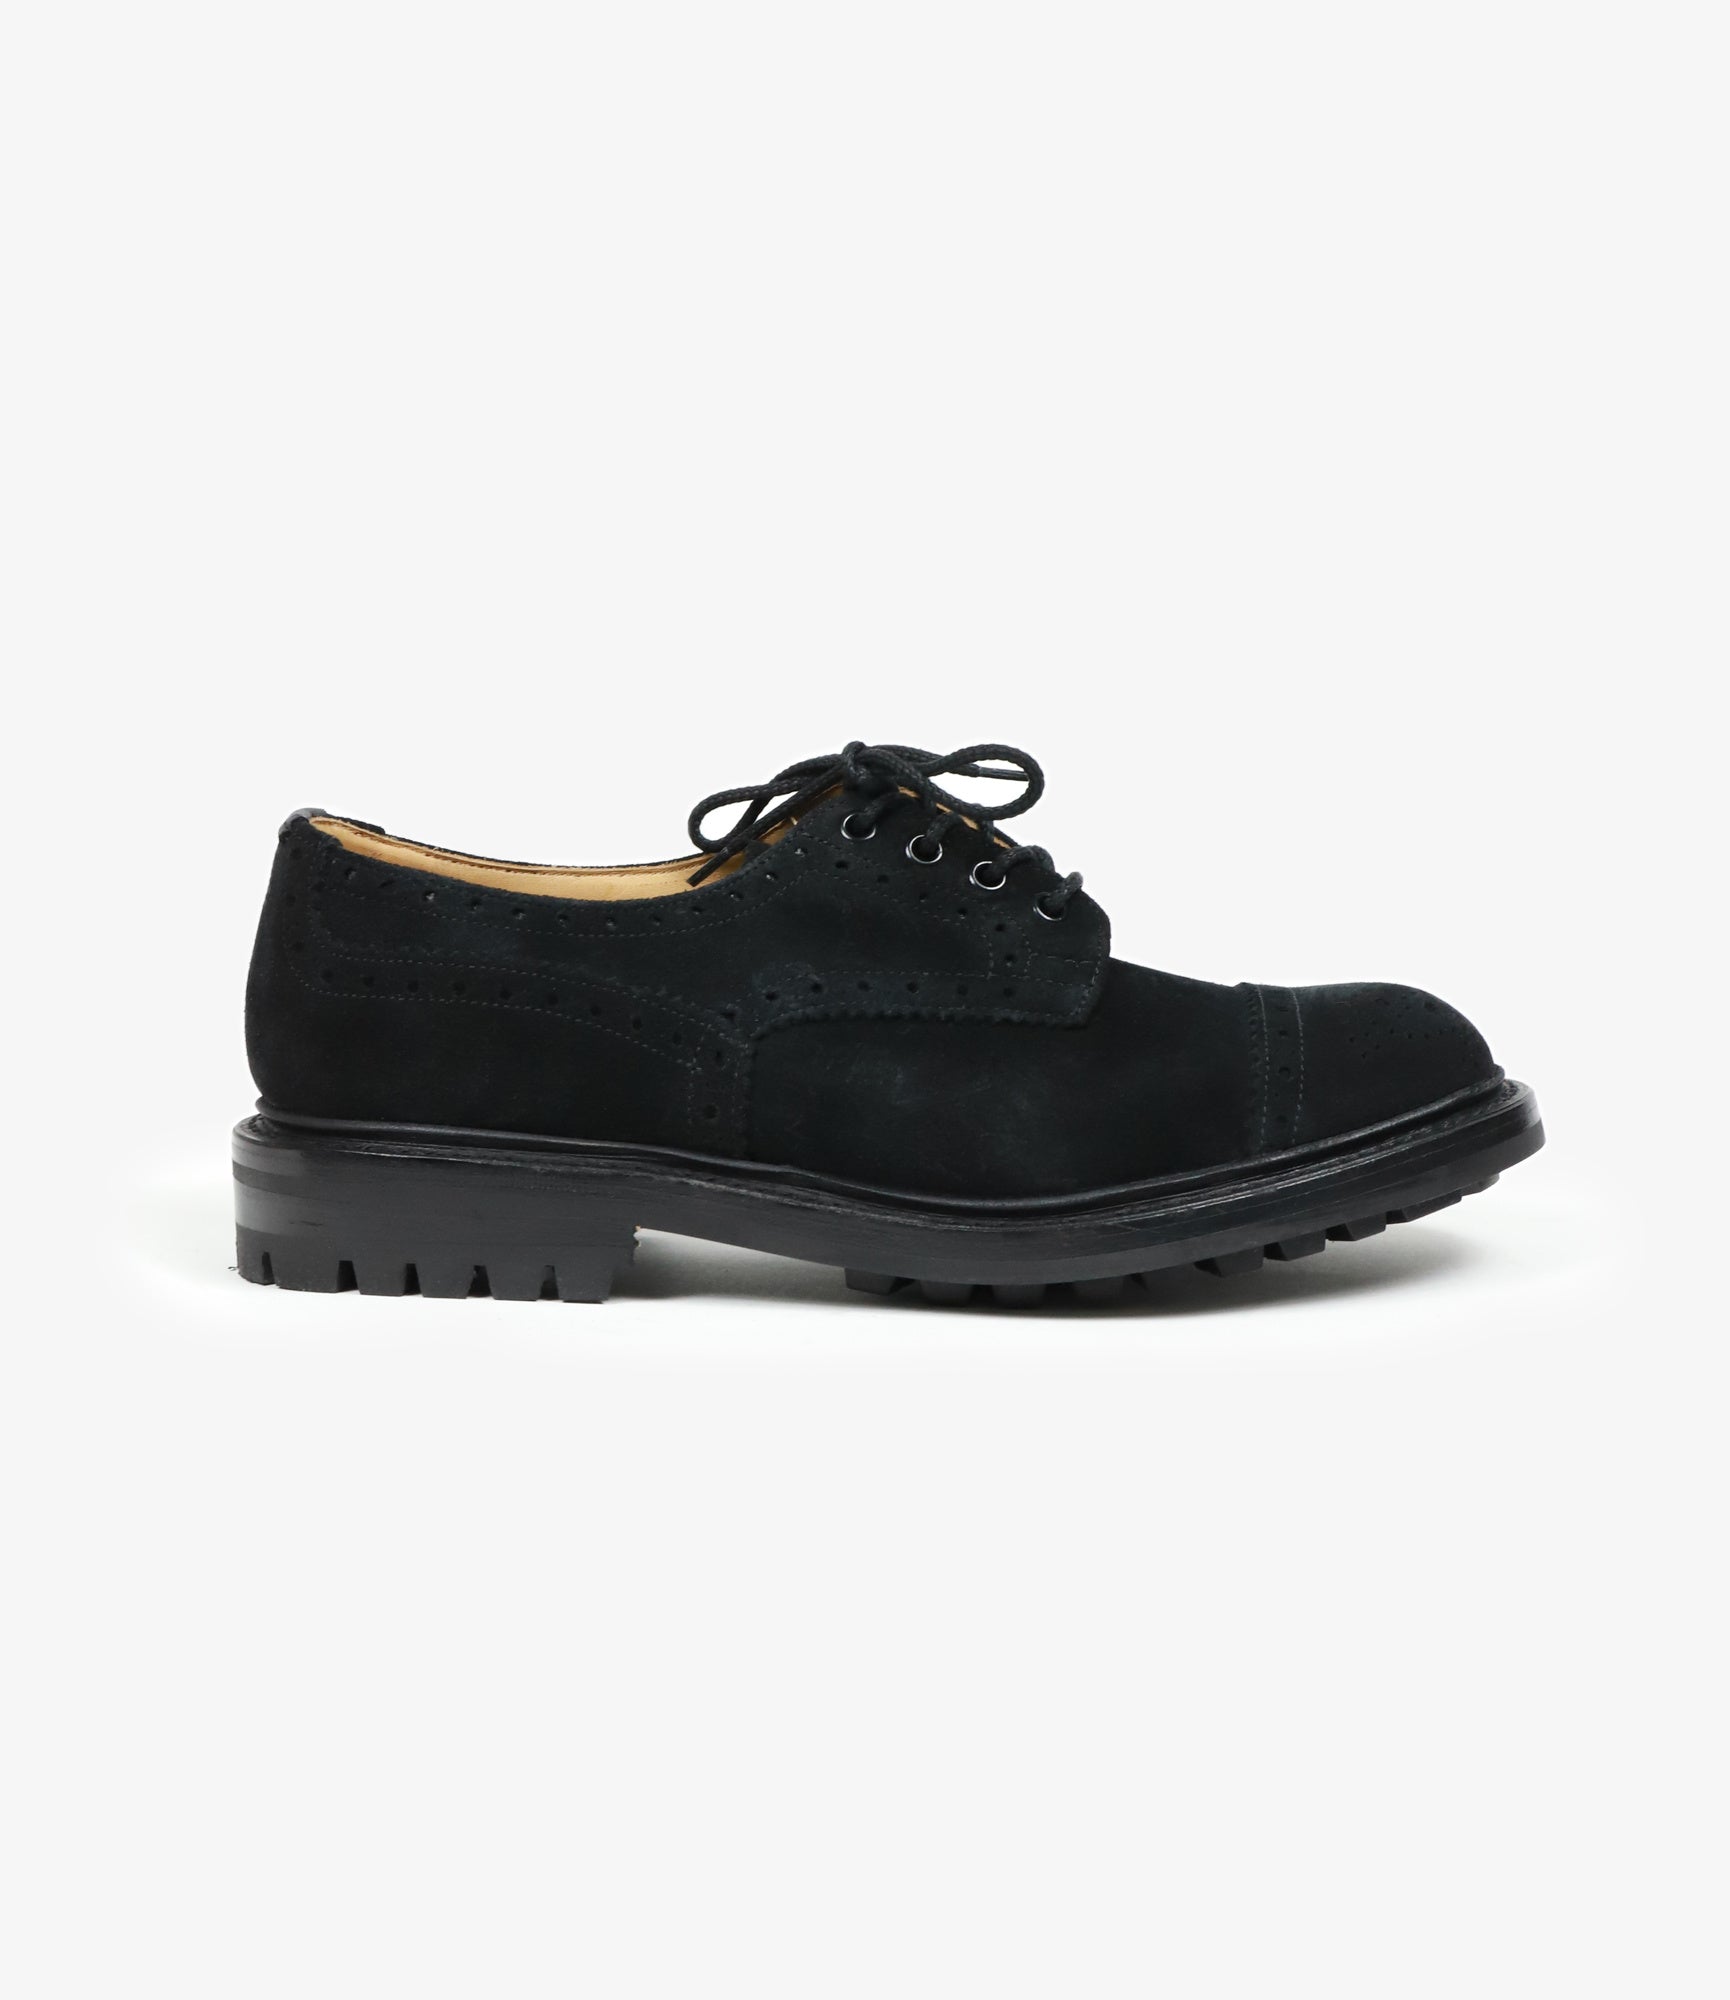 Tricker's Gibson Brogues - Black Suede